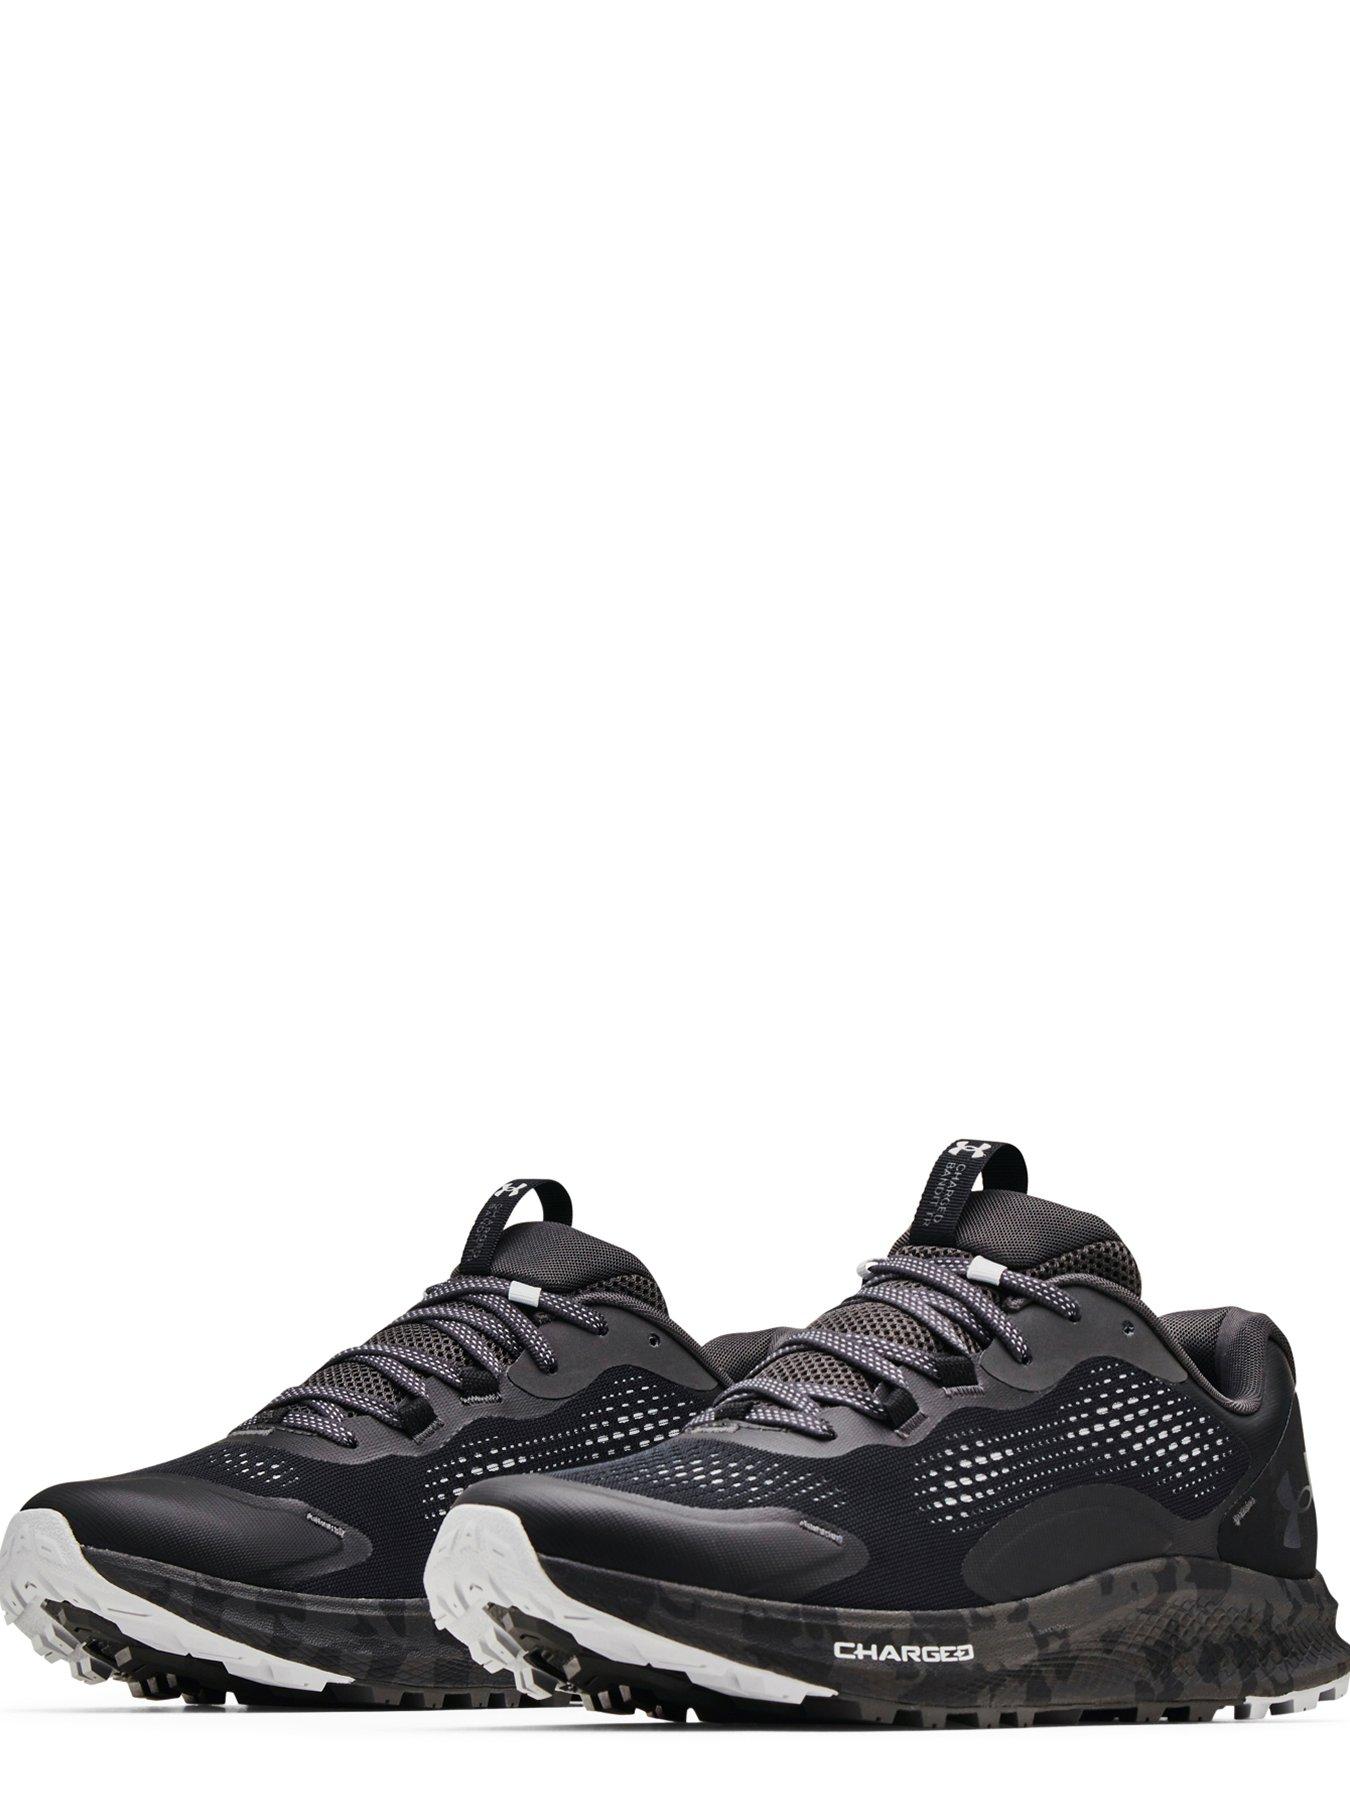 UNDER ARMOUR Charged Bandit TR 2 - Black/Grey